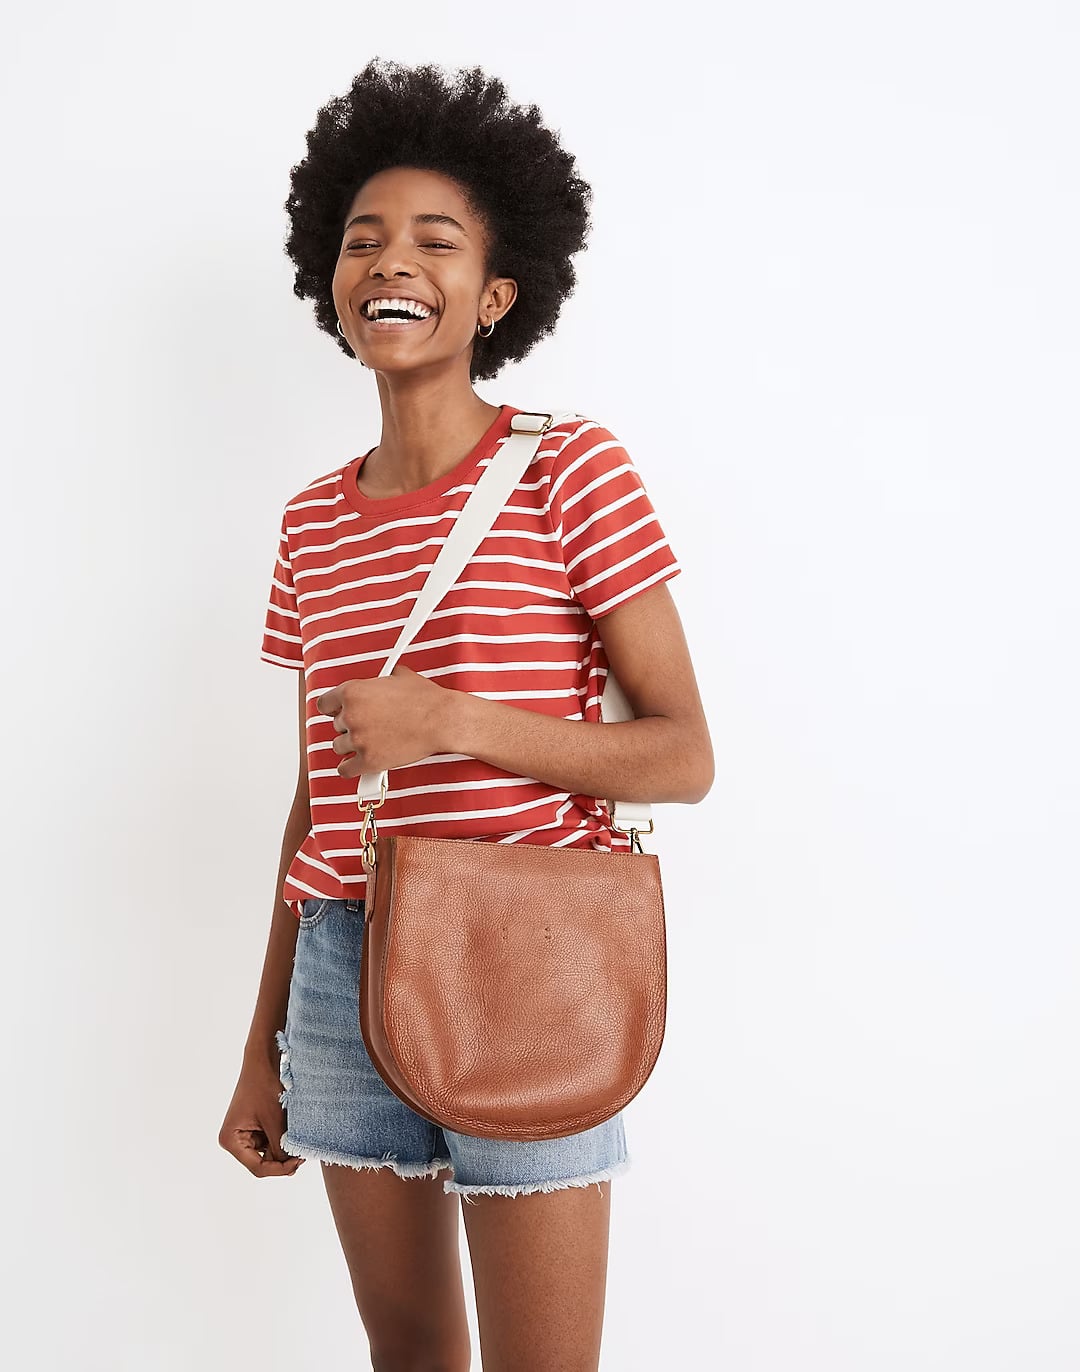 25 best crossbody bags and purses for traveling in 2023